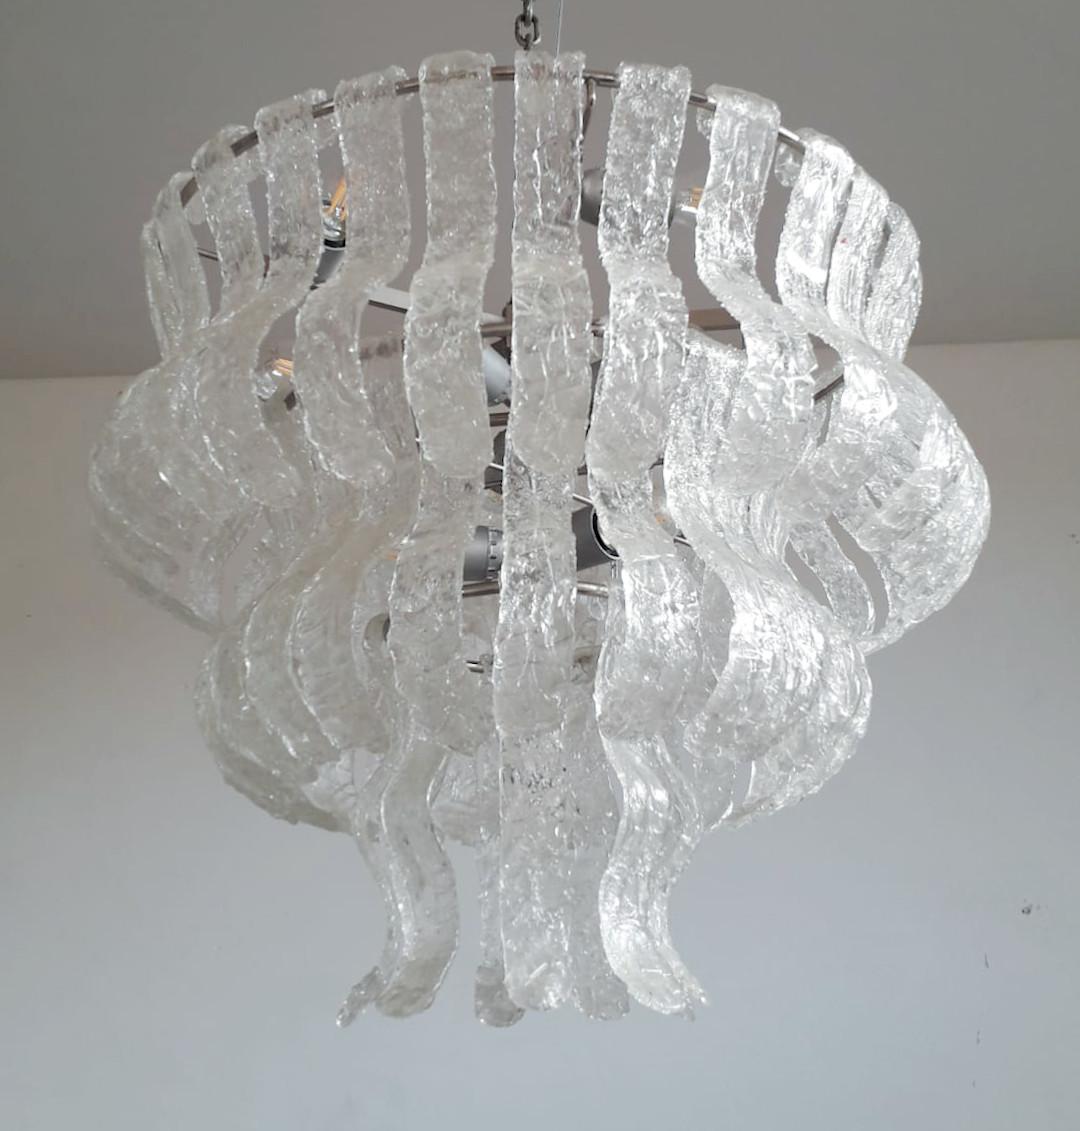 Vintage Italian chandelier with layered clear curved textured Murano glass panels / Made in Italy by La Murrina, circa 1960s
14 lights / E26 or E27 type / max 60W each
Measures: Diameter 25.5 inches / height 21.5 inches plus chain and canopy
1